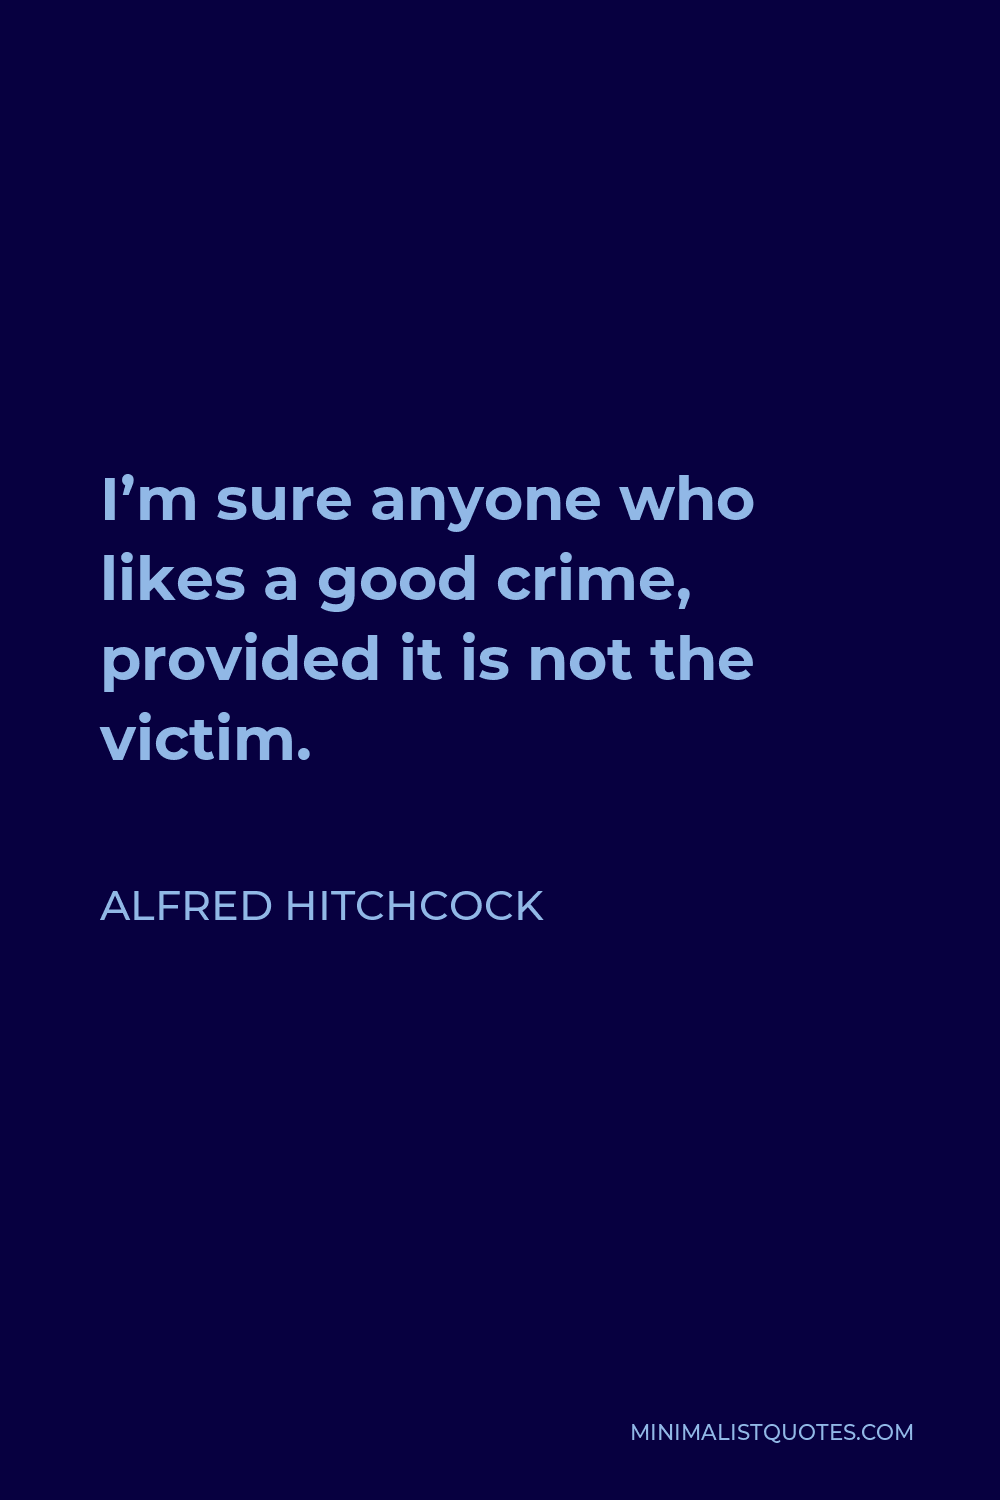 Alfred Hitchcock Quote - I’m sure anyone who likes a good crime, provided it is not the victim.